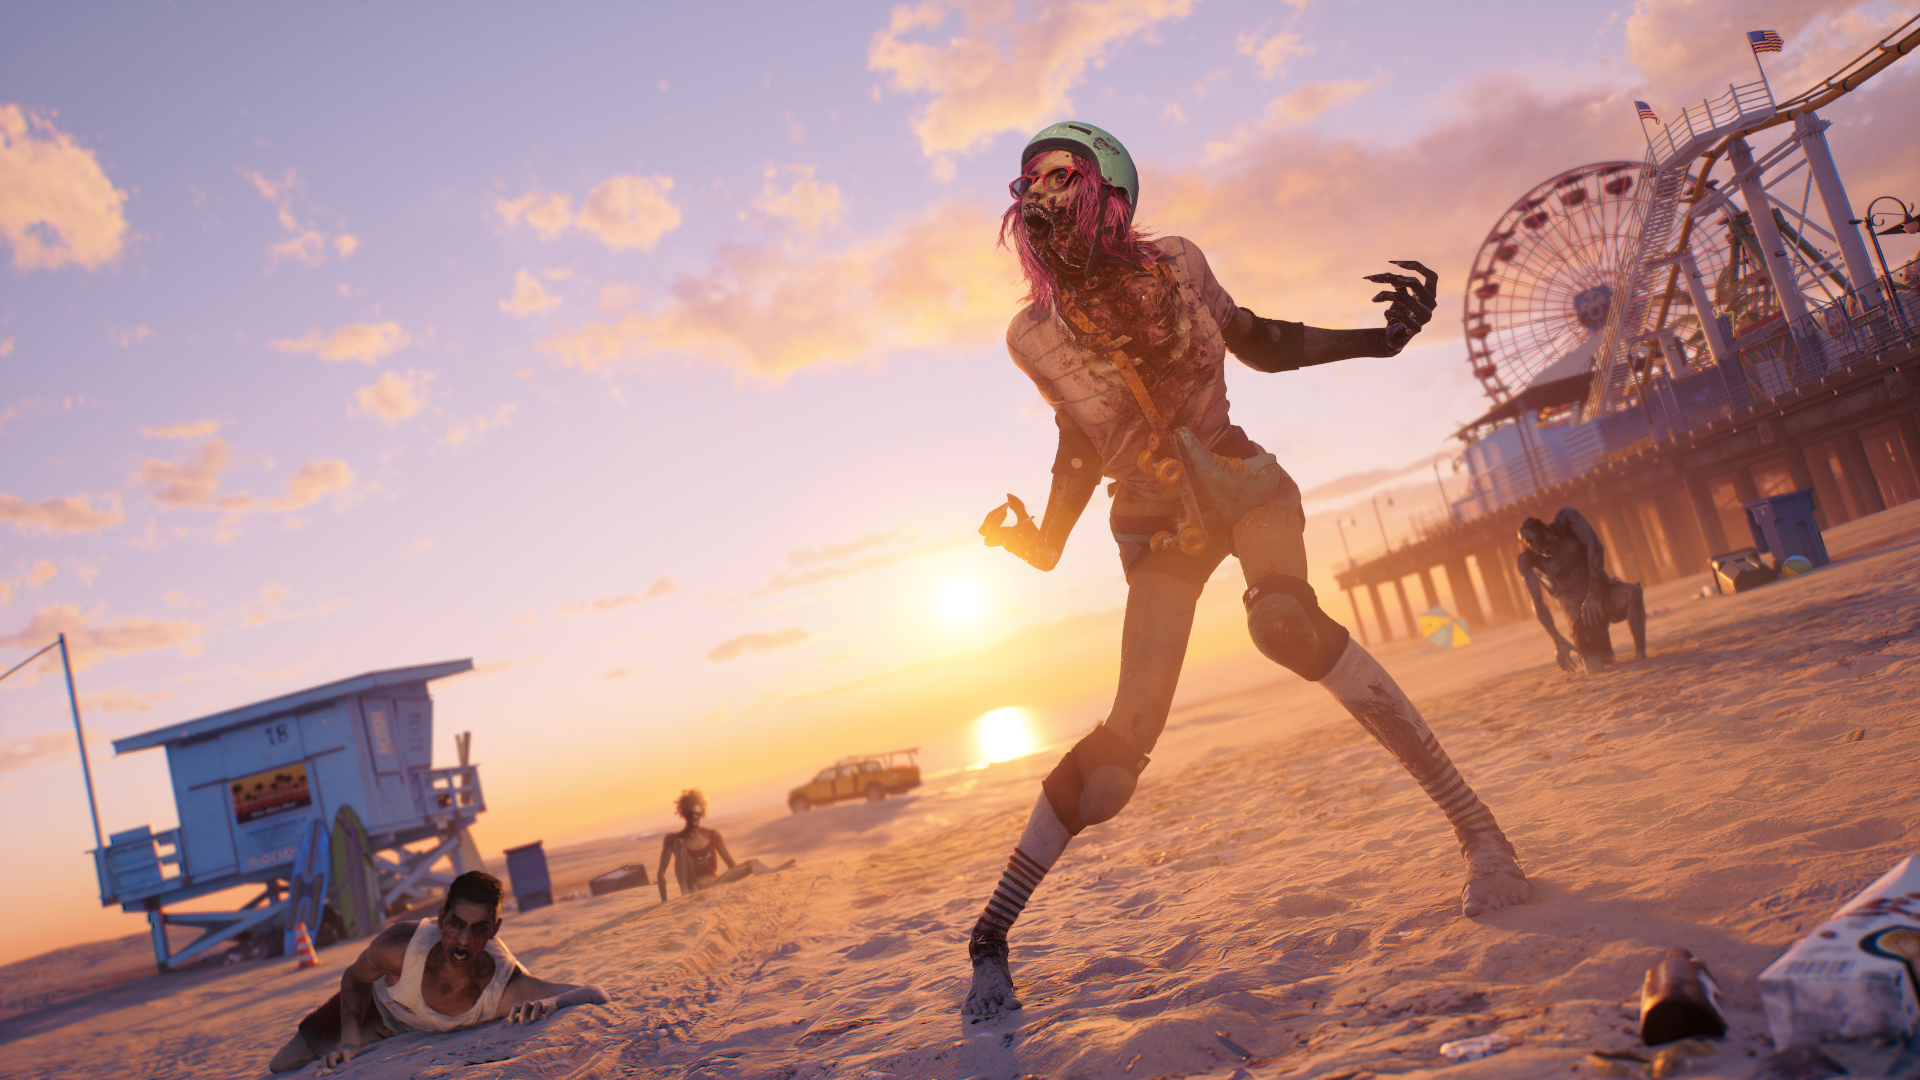 Zombie screaming on the beach at sunset